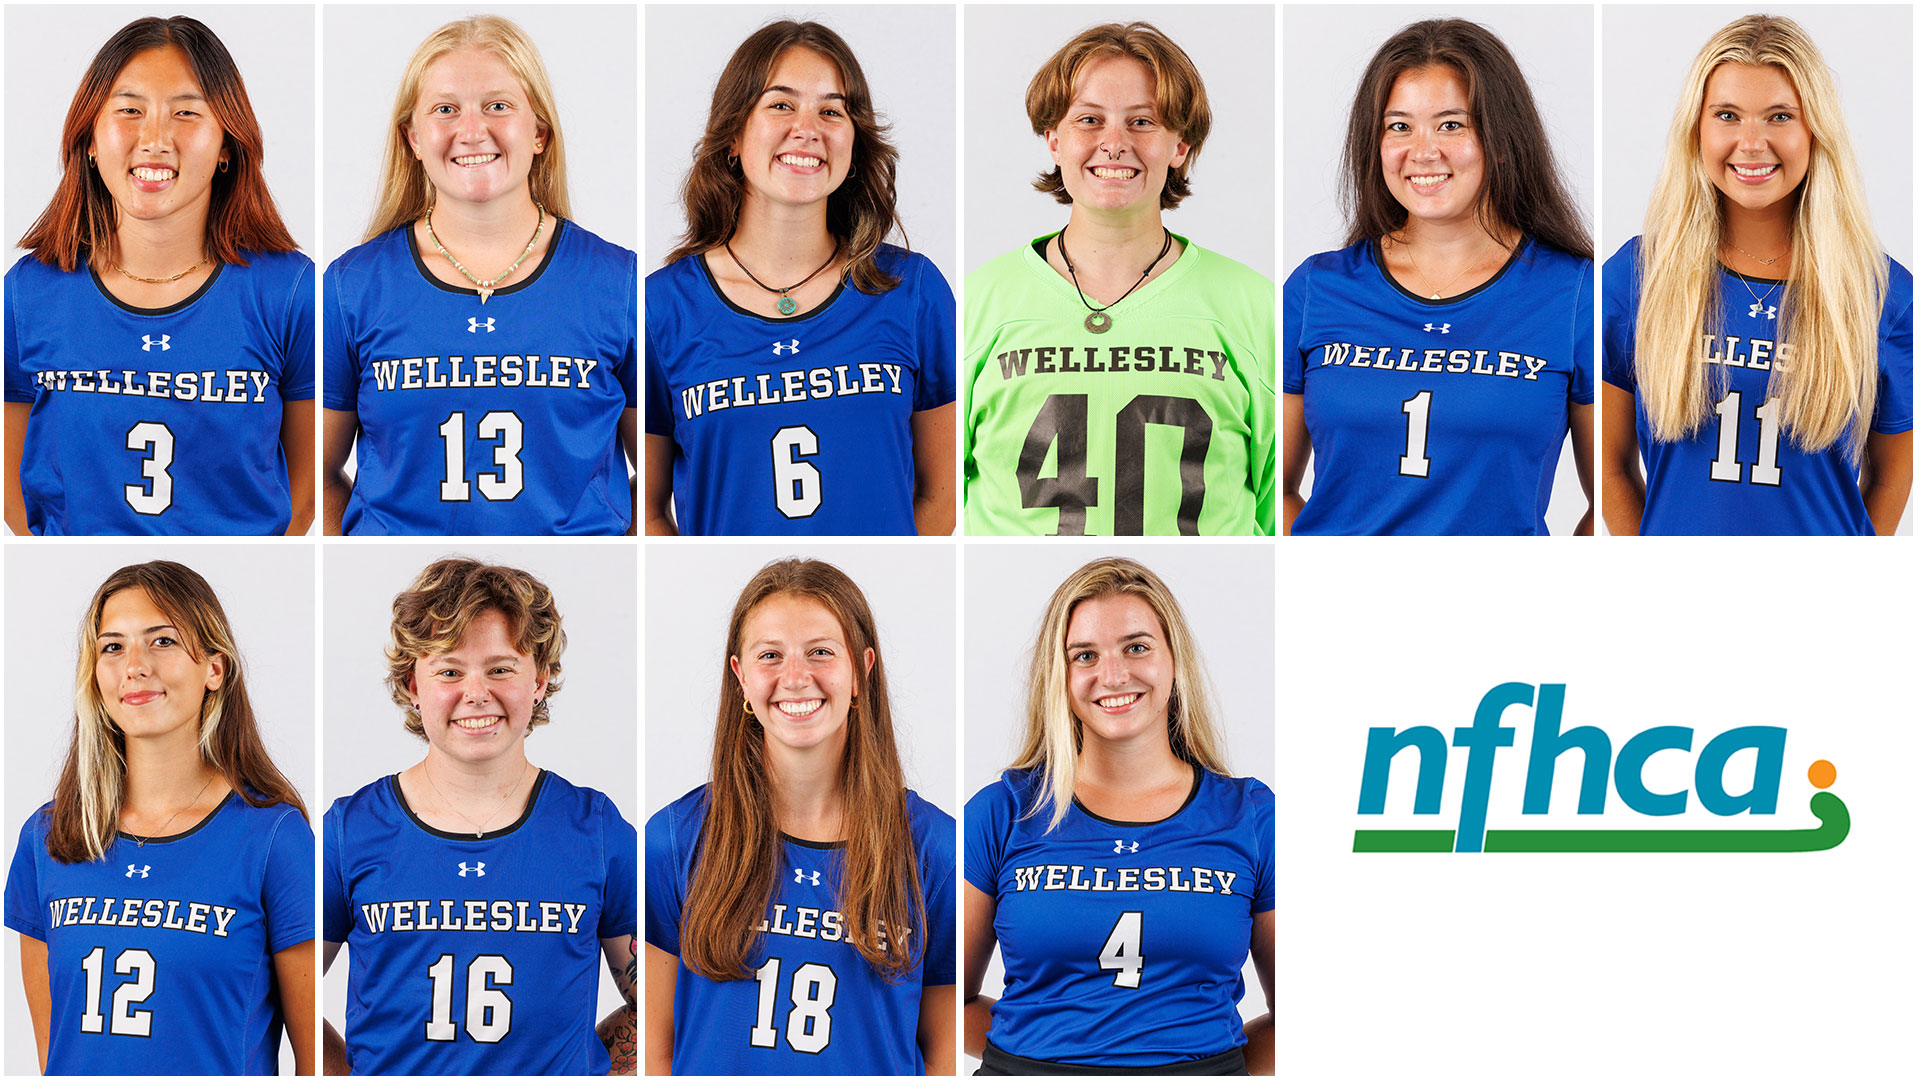 10 members of Wellesley field hockey were named to the National Academic Squad on Wednesday (Frank Poulin)